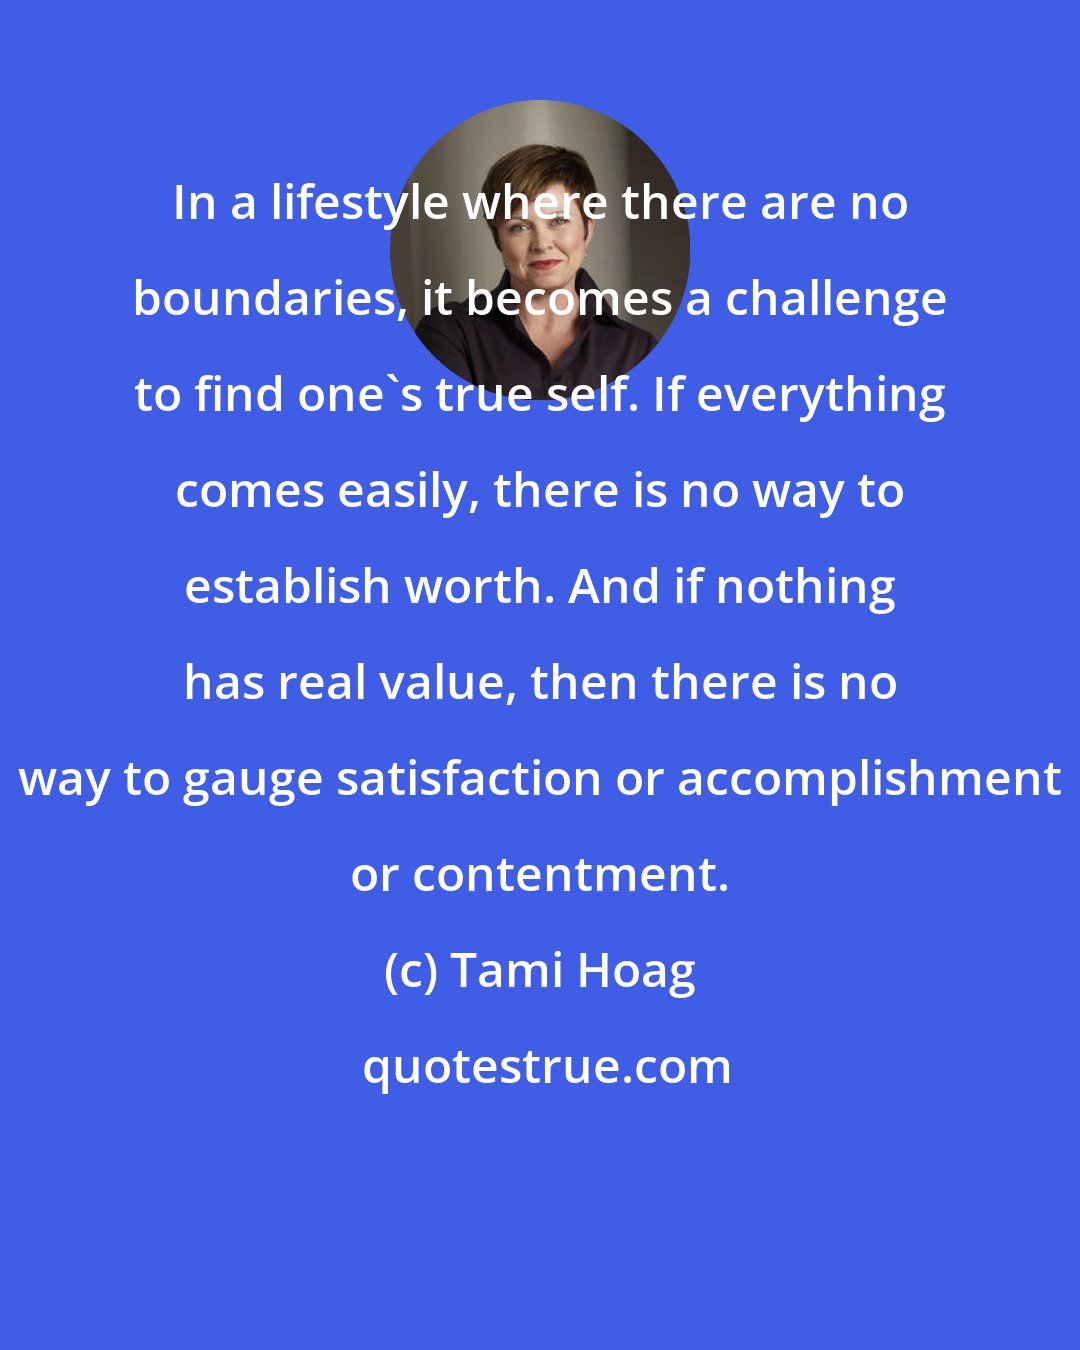 Tami Hoag: In a lifestyle where there are no boundaries, it becomes a challenge to find one's true self. If everything comes easily, there is no way to establish worth. And if nothing has real value, then there is no way to gauge satisfaction or accomplishment or contentment.